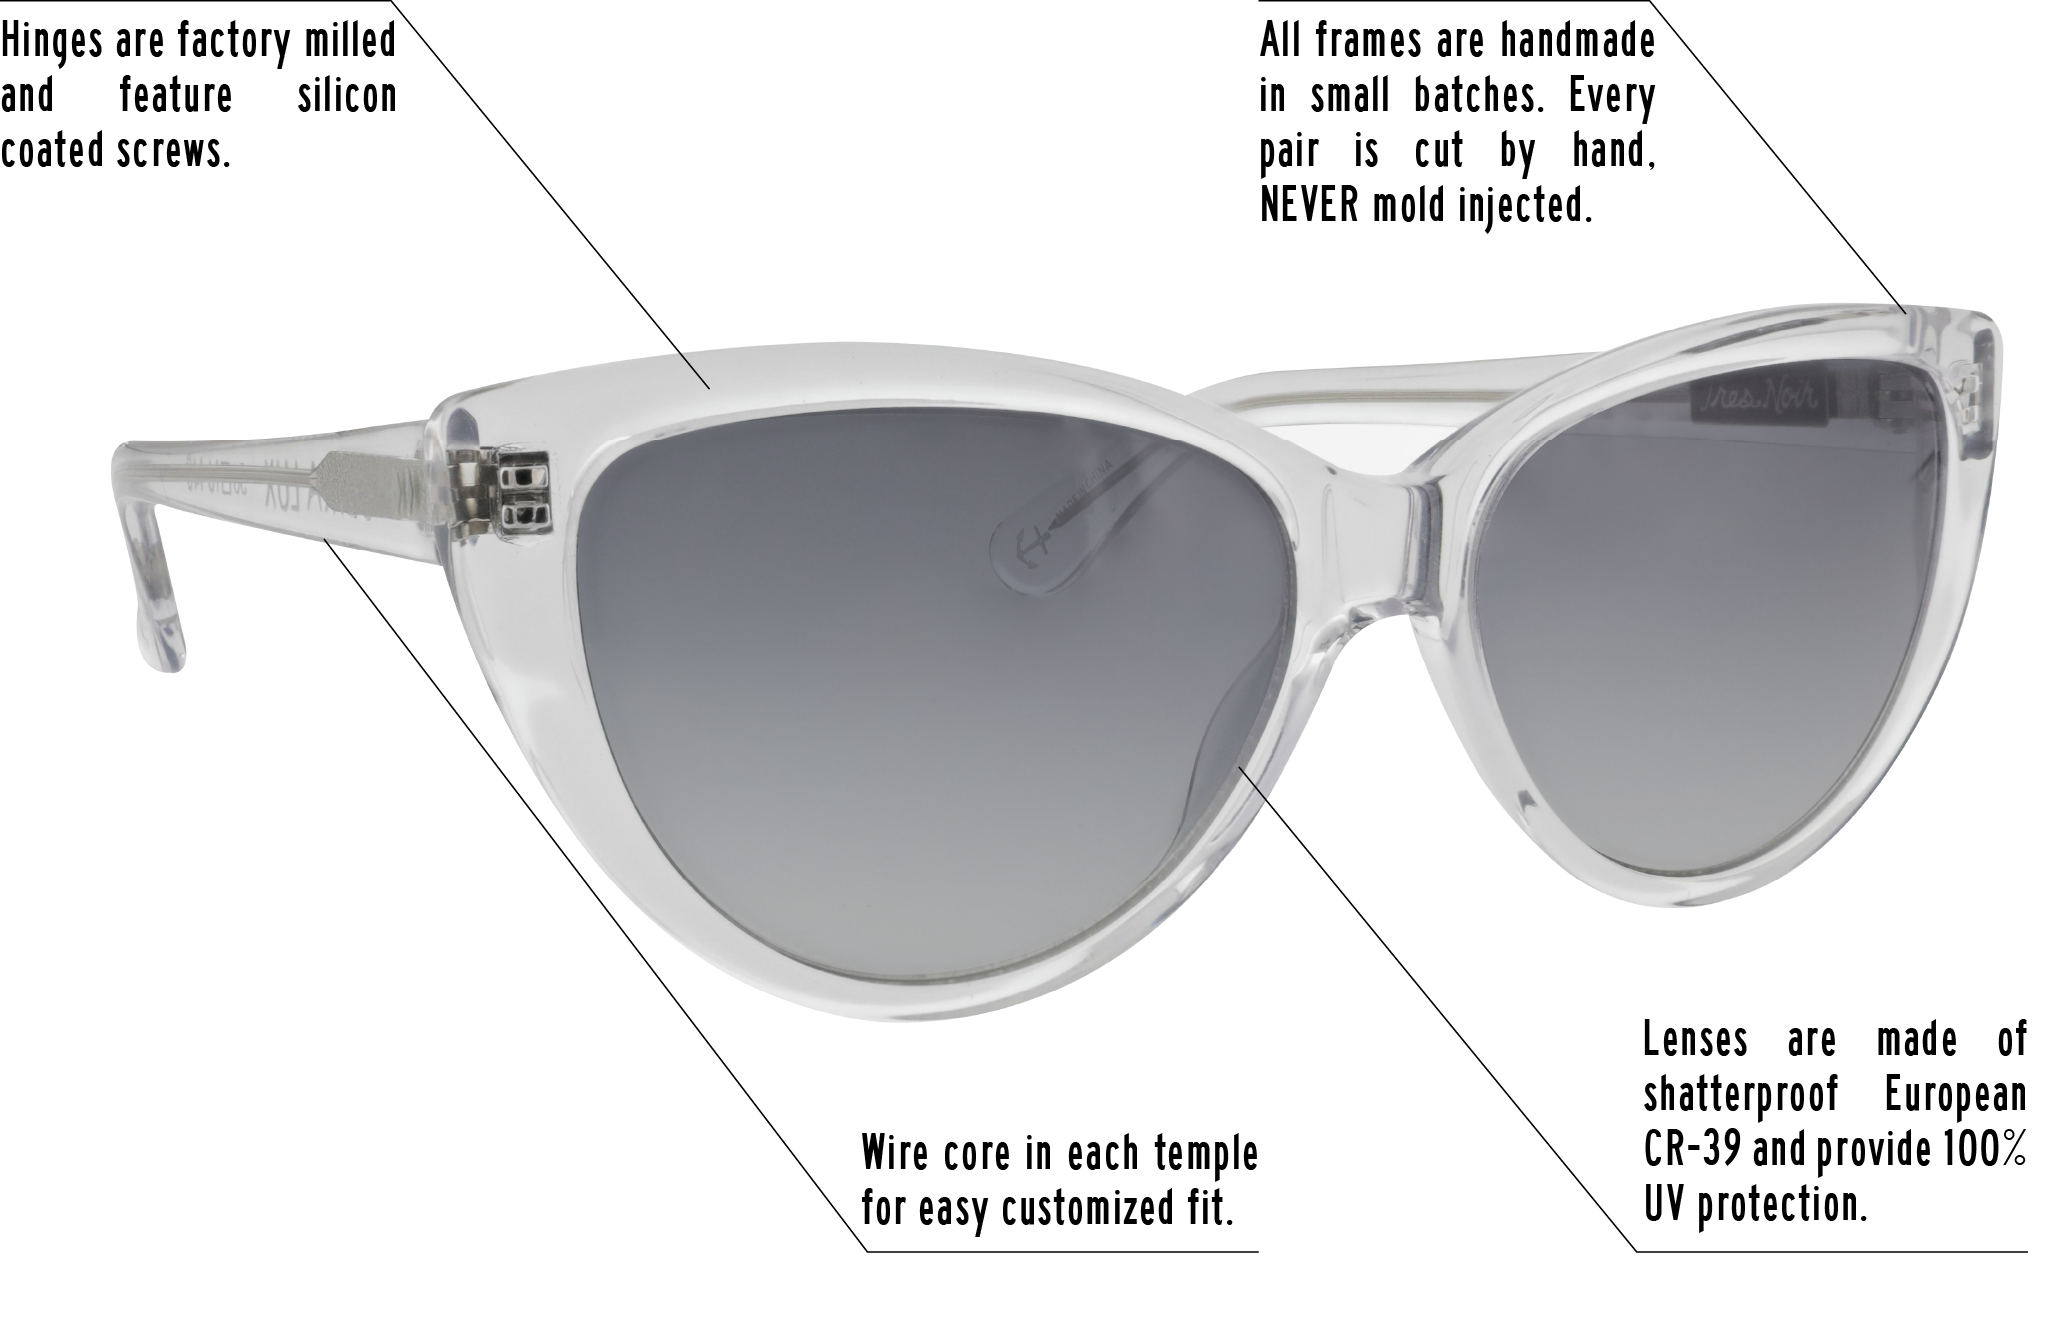 Hinges are factory milled and feature silicon coated screws. All frames are handmade in small batches. Every pair is cut by hand. Never Mold injected. Wire core in each temple for easy customized fit. Lenses are made of shatterproof European CR-39 and provide 100% UV protection.